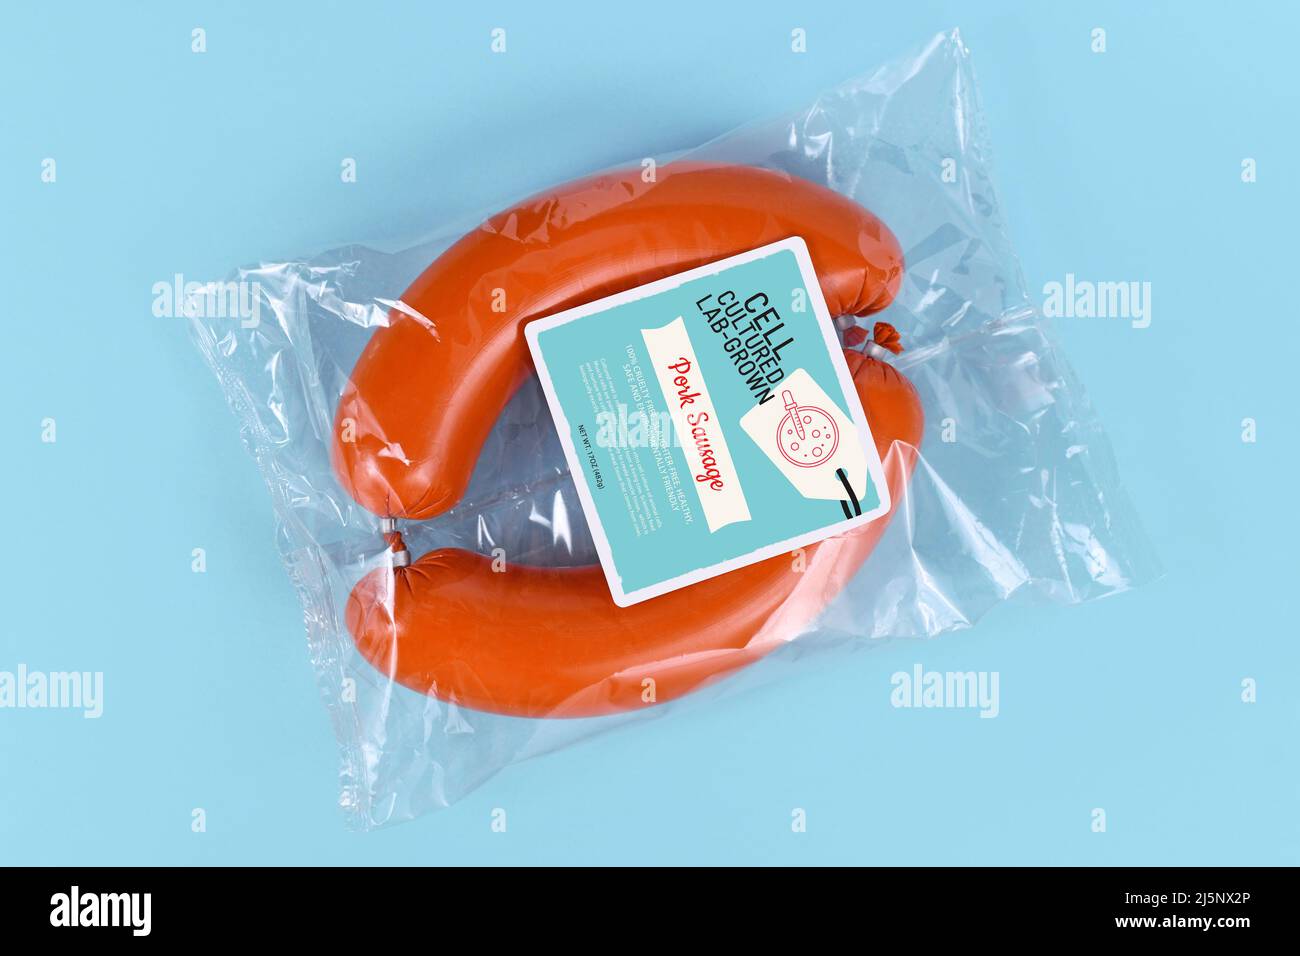 Lab grown cell cultured meat concept for artificial meat showing packed pork sausages with made up label Stock Photo